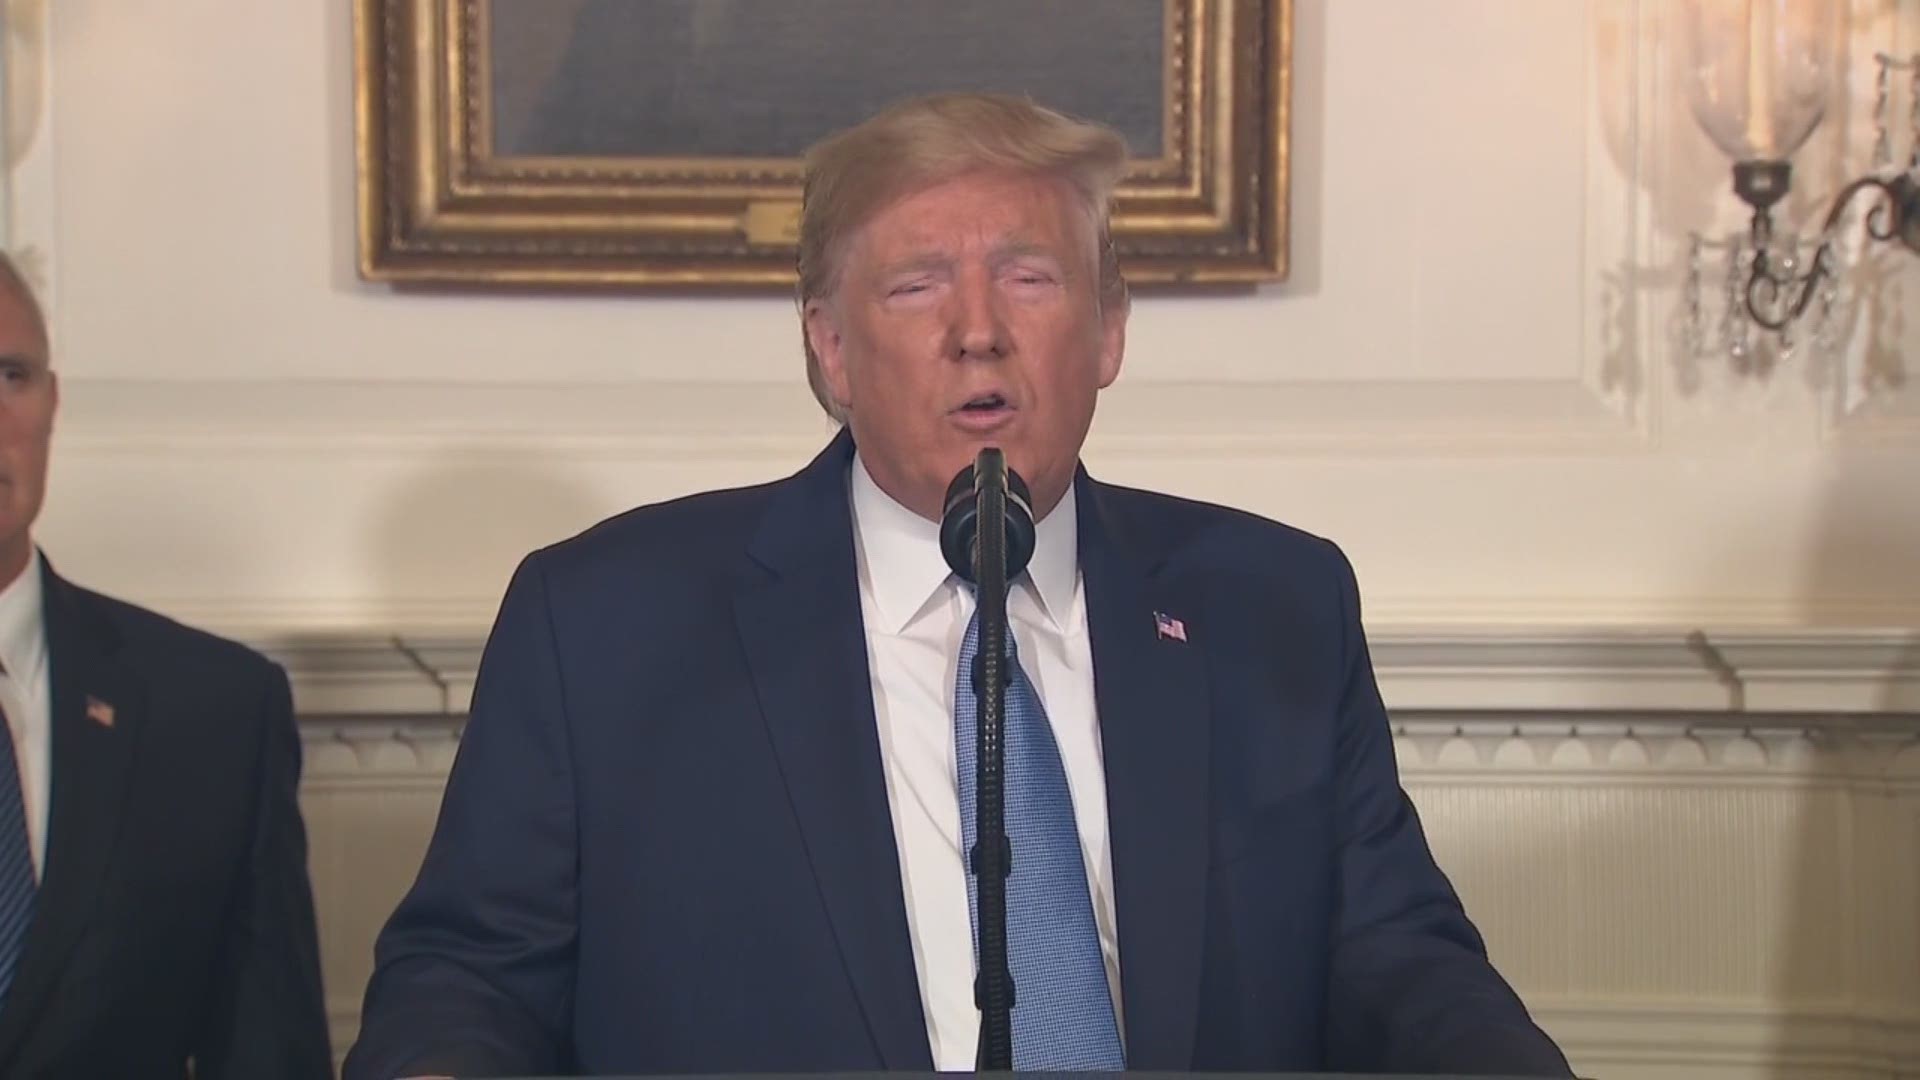 President Trump flubs in White House speech reacting to the mass shootings in Dayton and El Paso.